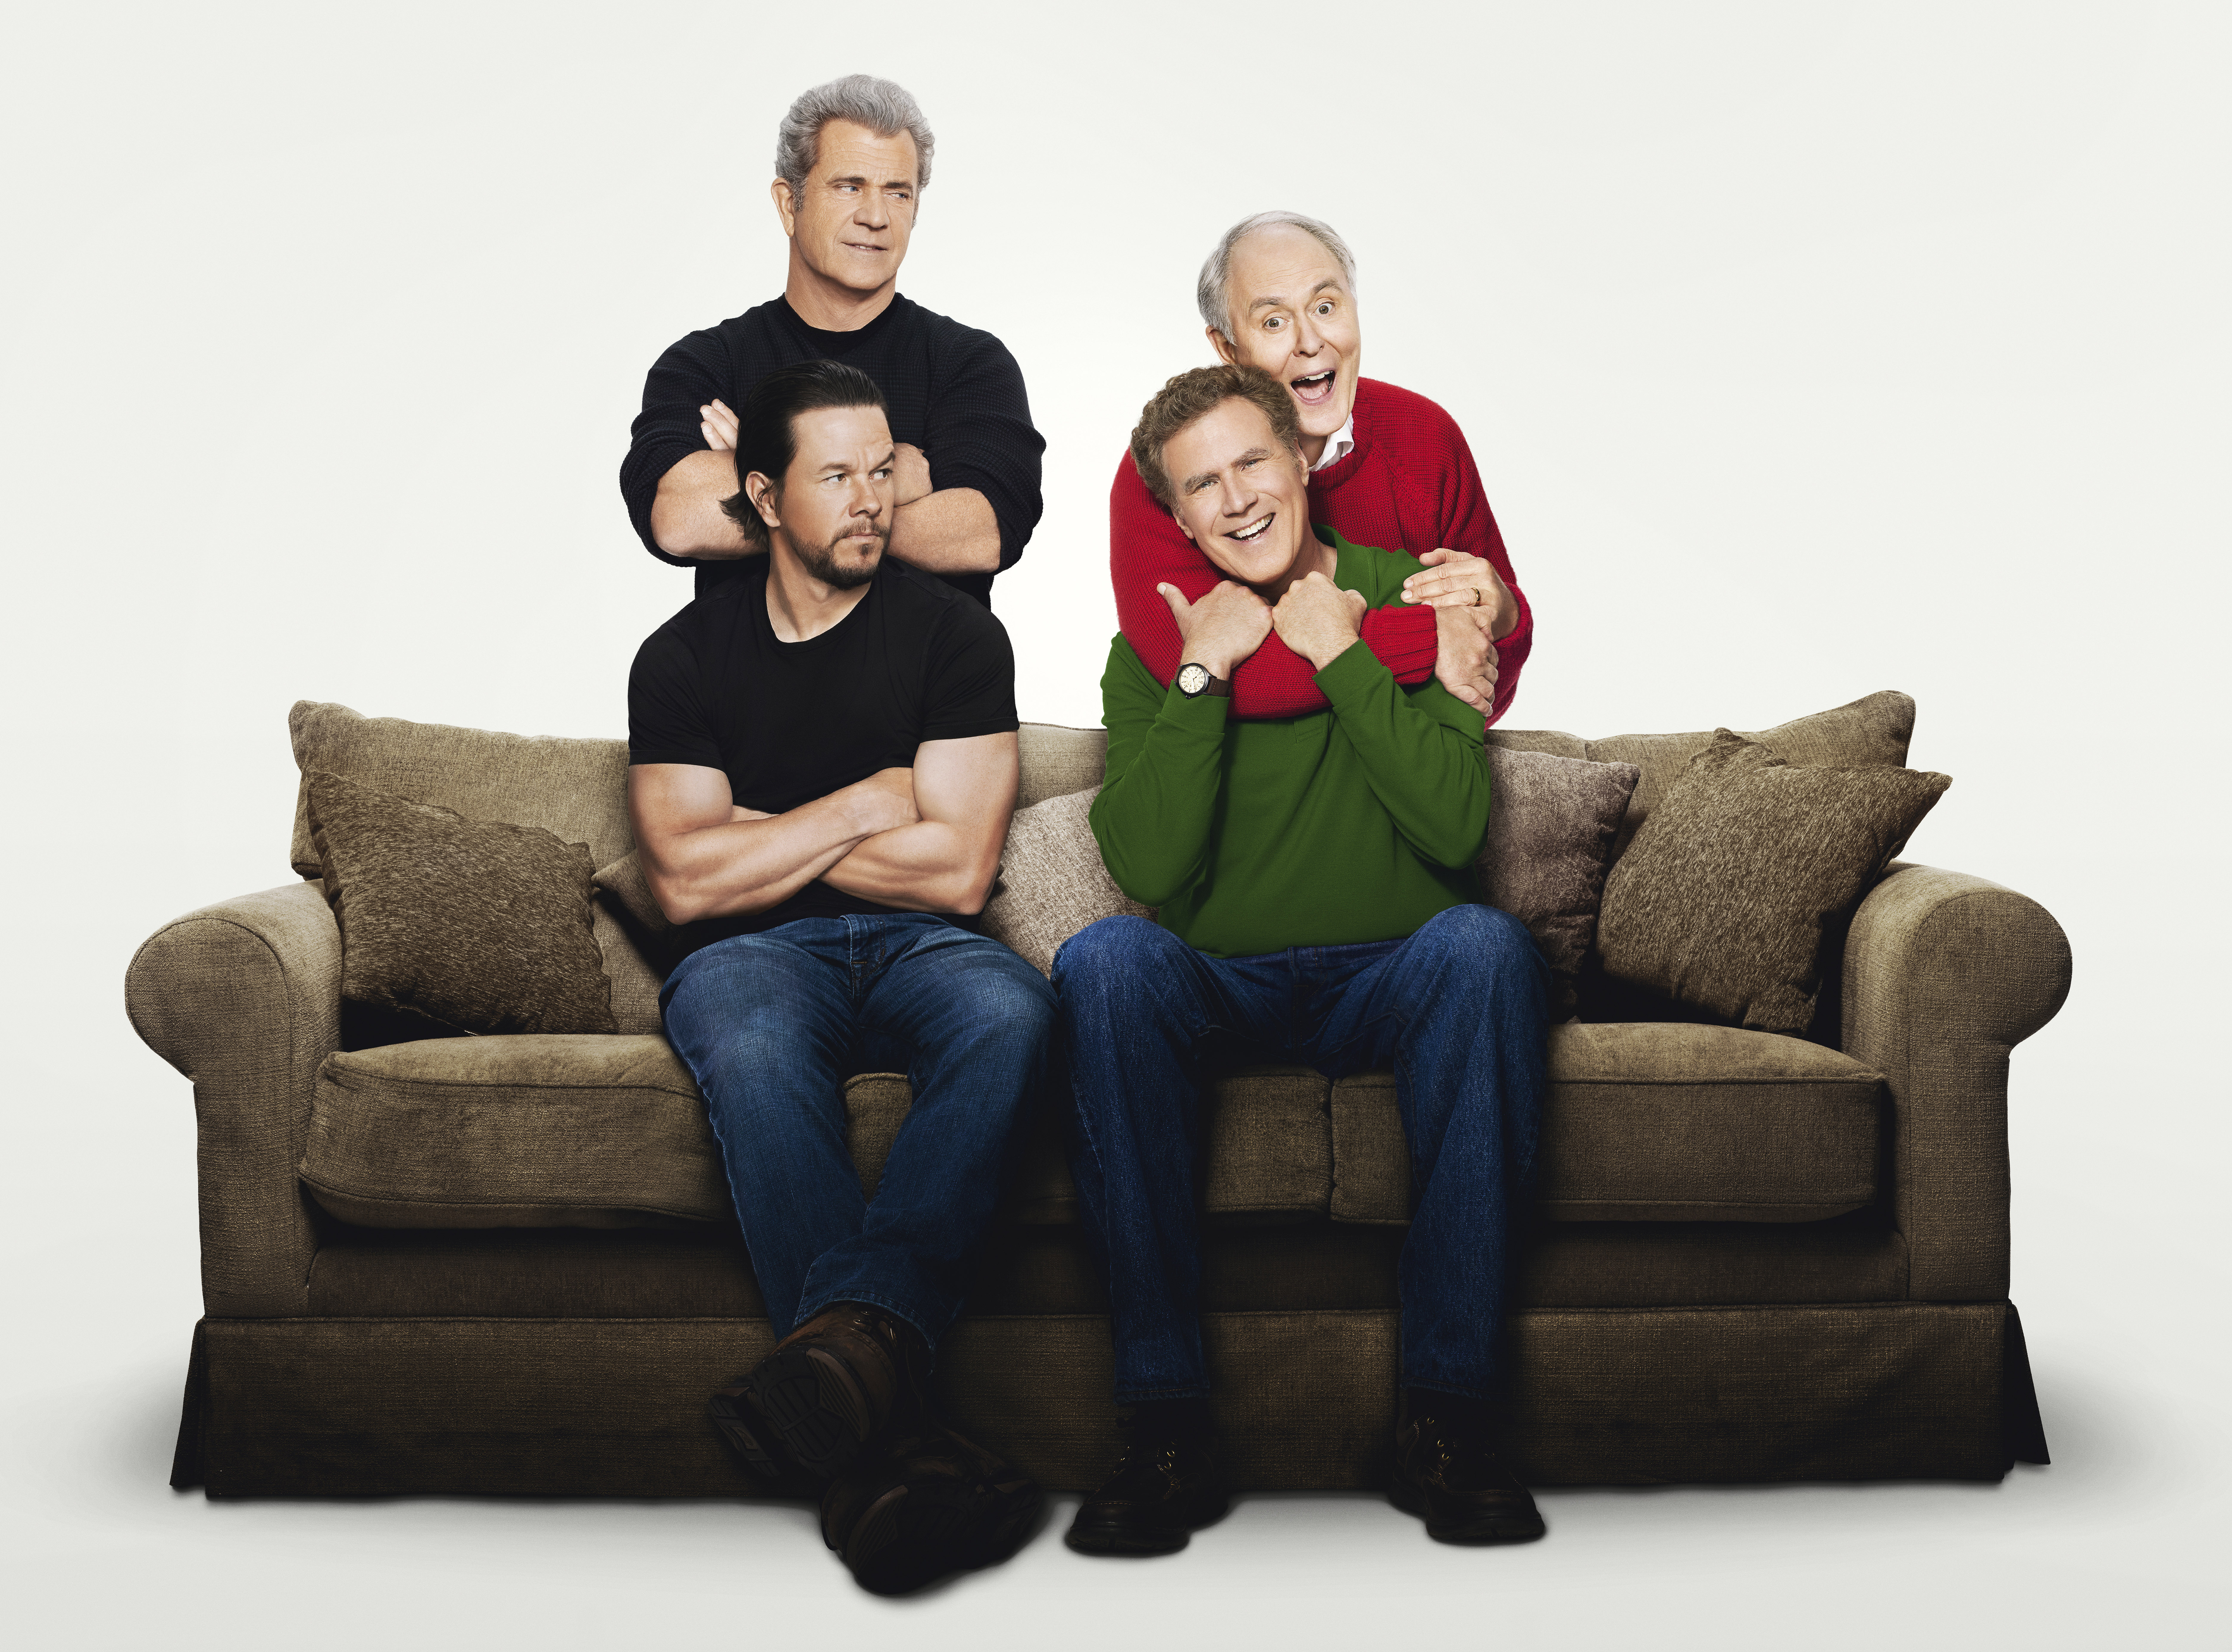 movie, daddy's home 2, john lithgow, mark wahlberg, mel gibson, will ferrell